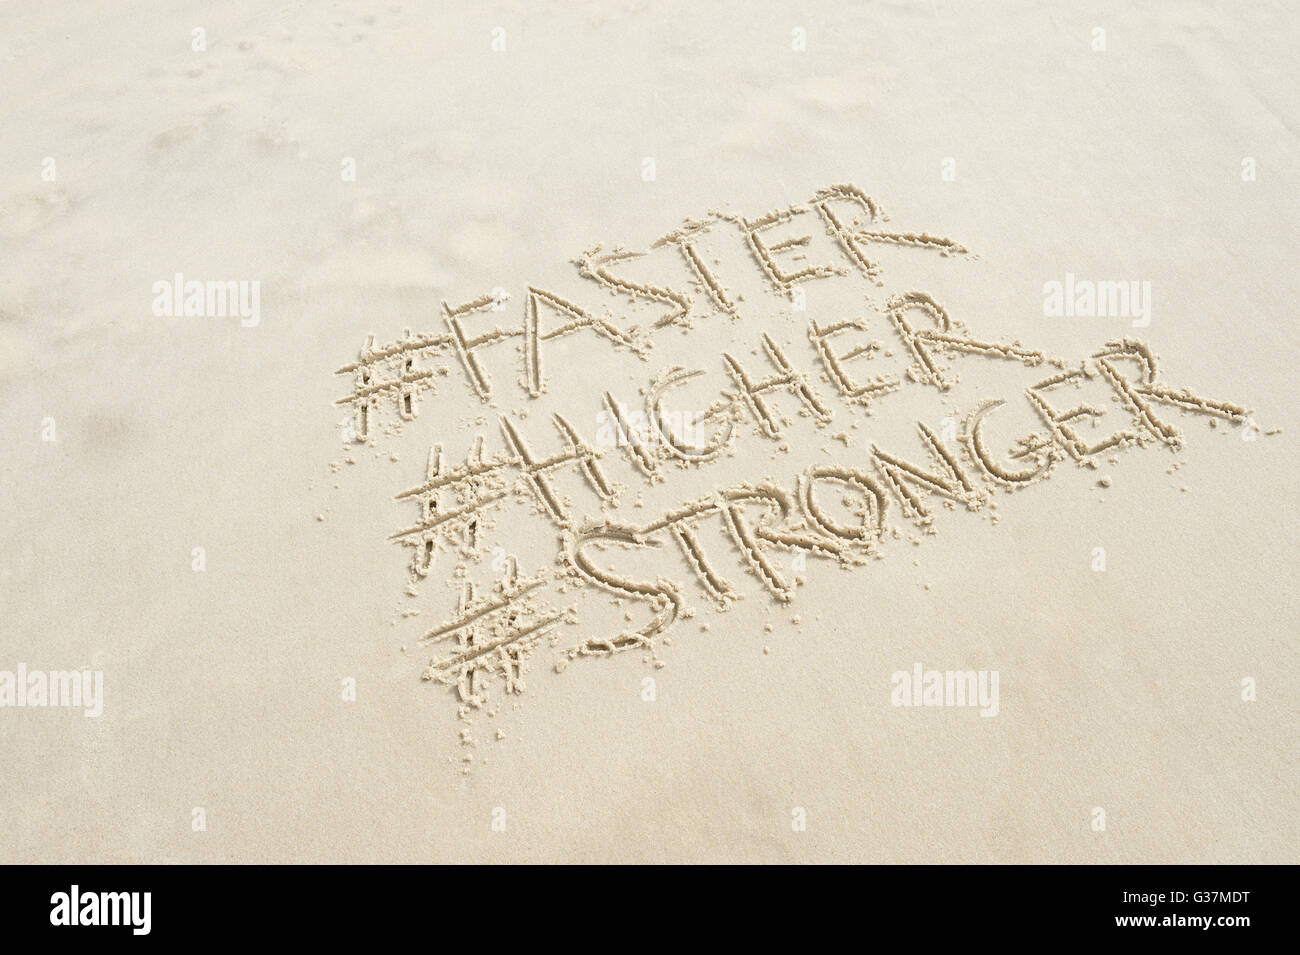 RIO DE JANEIRO - MARCH 20, 2016: The Olympic motto, Faster, Higher, Stronger, introduced at the 1924 Games in Paris, in sand. Stock Photo